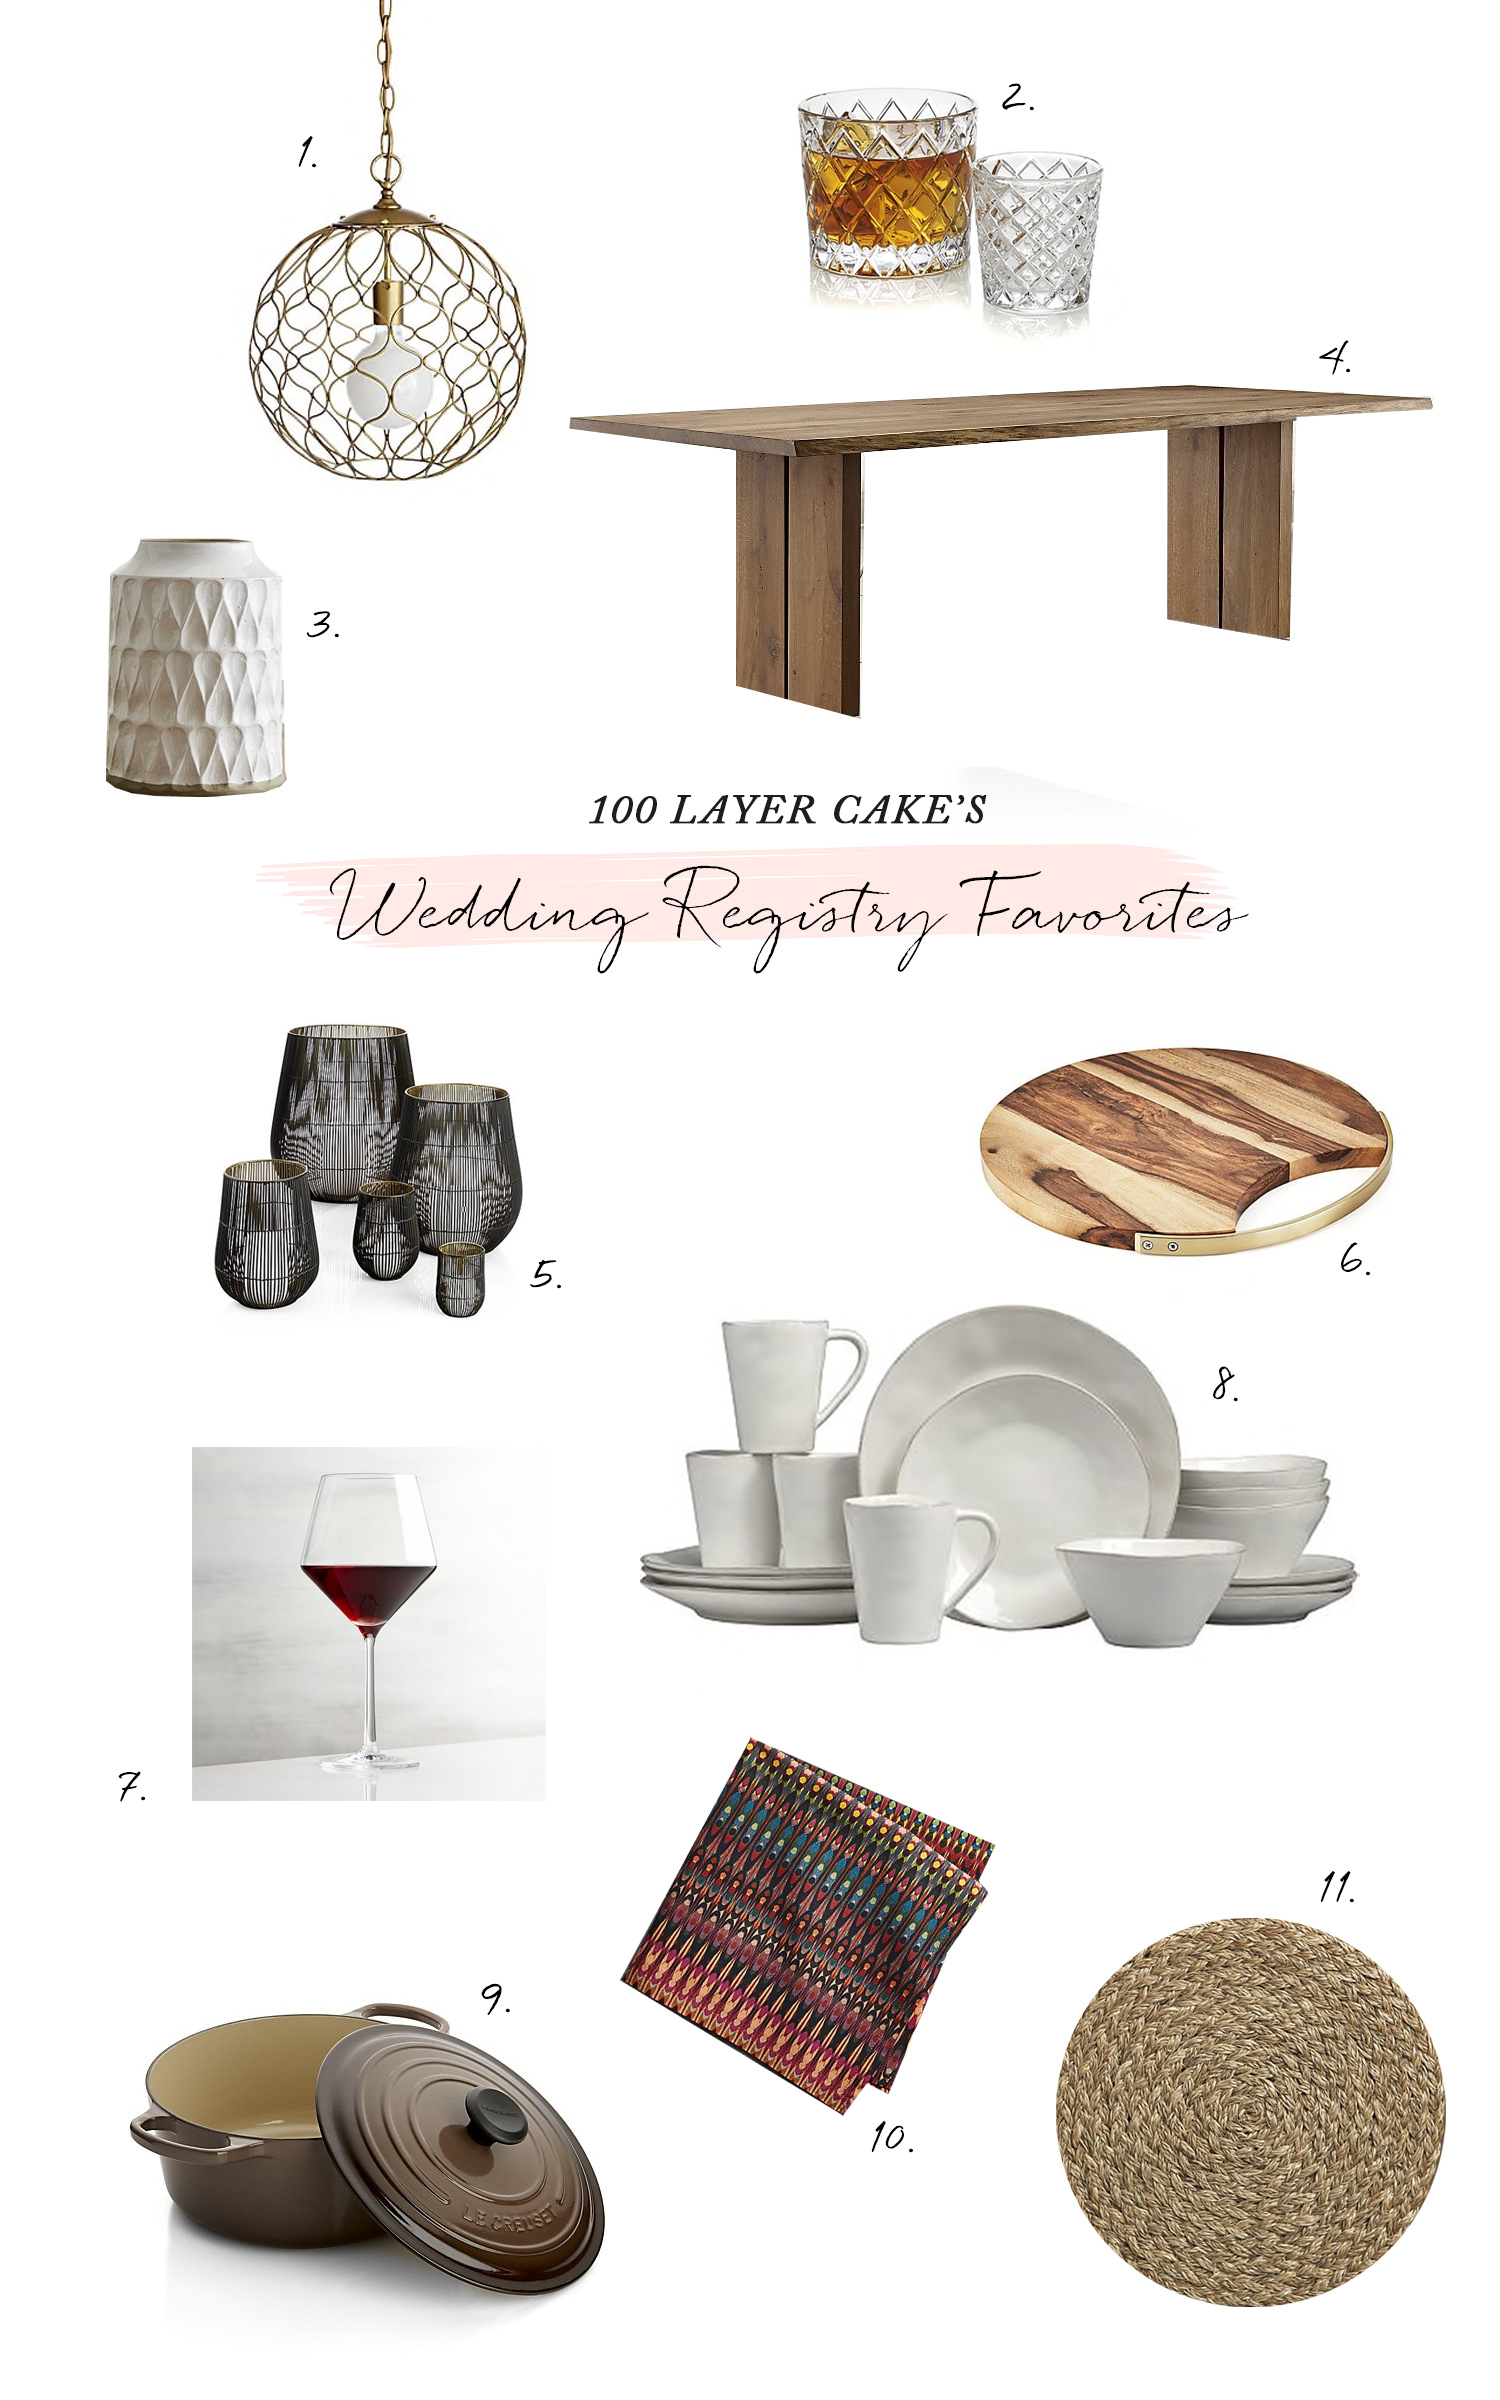 100 Layer Cake wedding registry favorites with Crate and Barrel